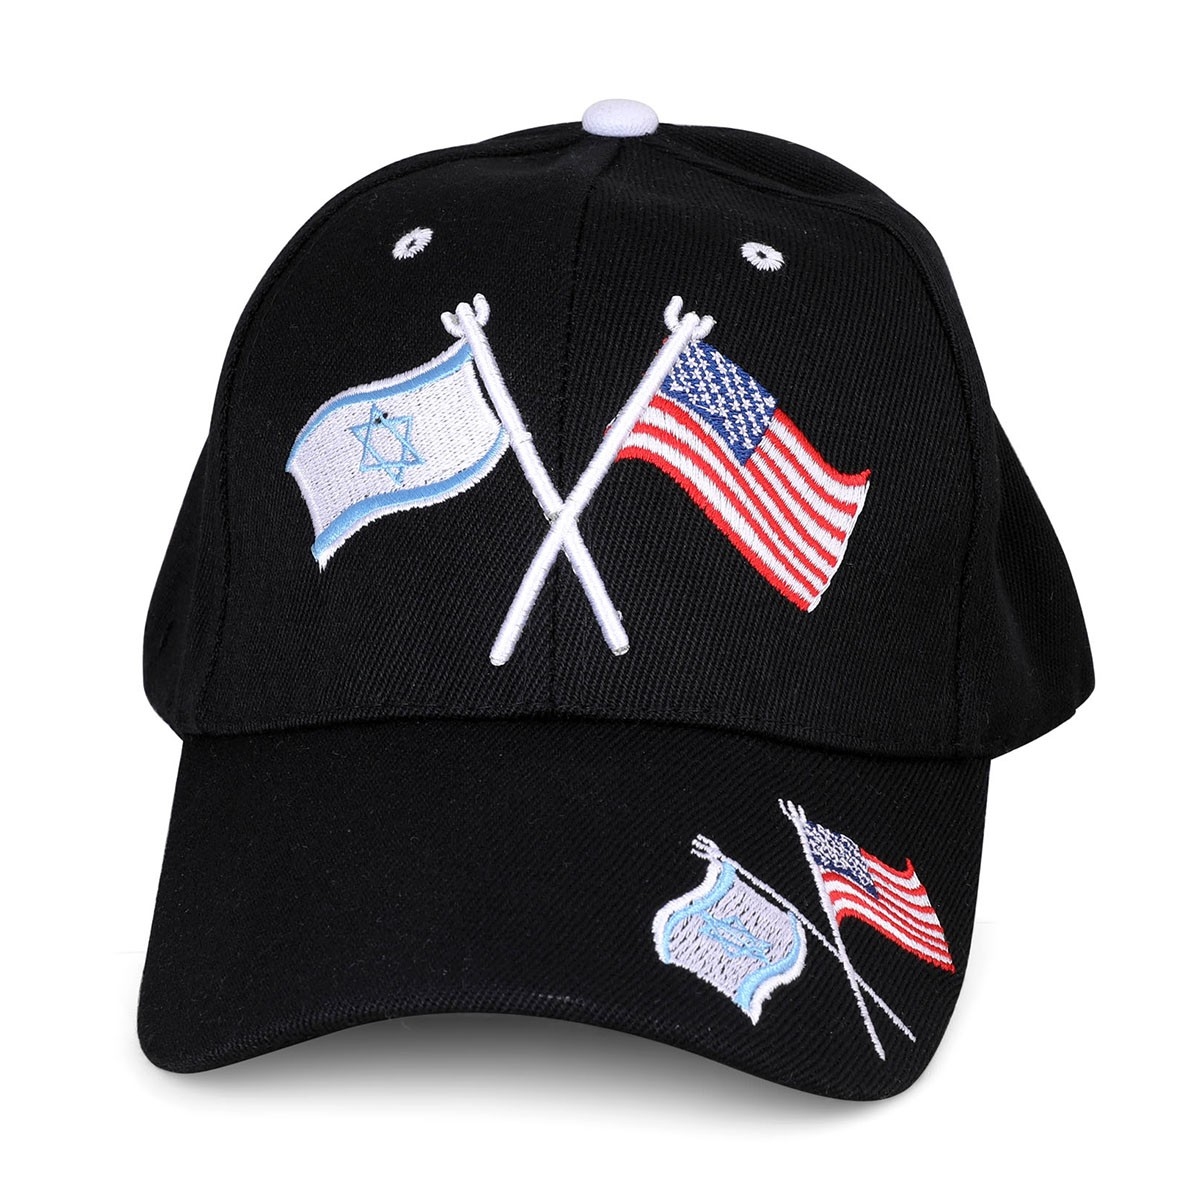 Embroidered Black American and Israeli Flags Unity Sports Cap - 1